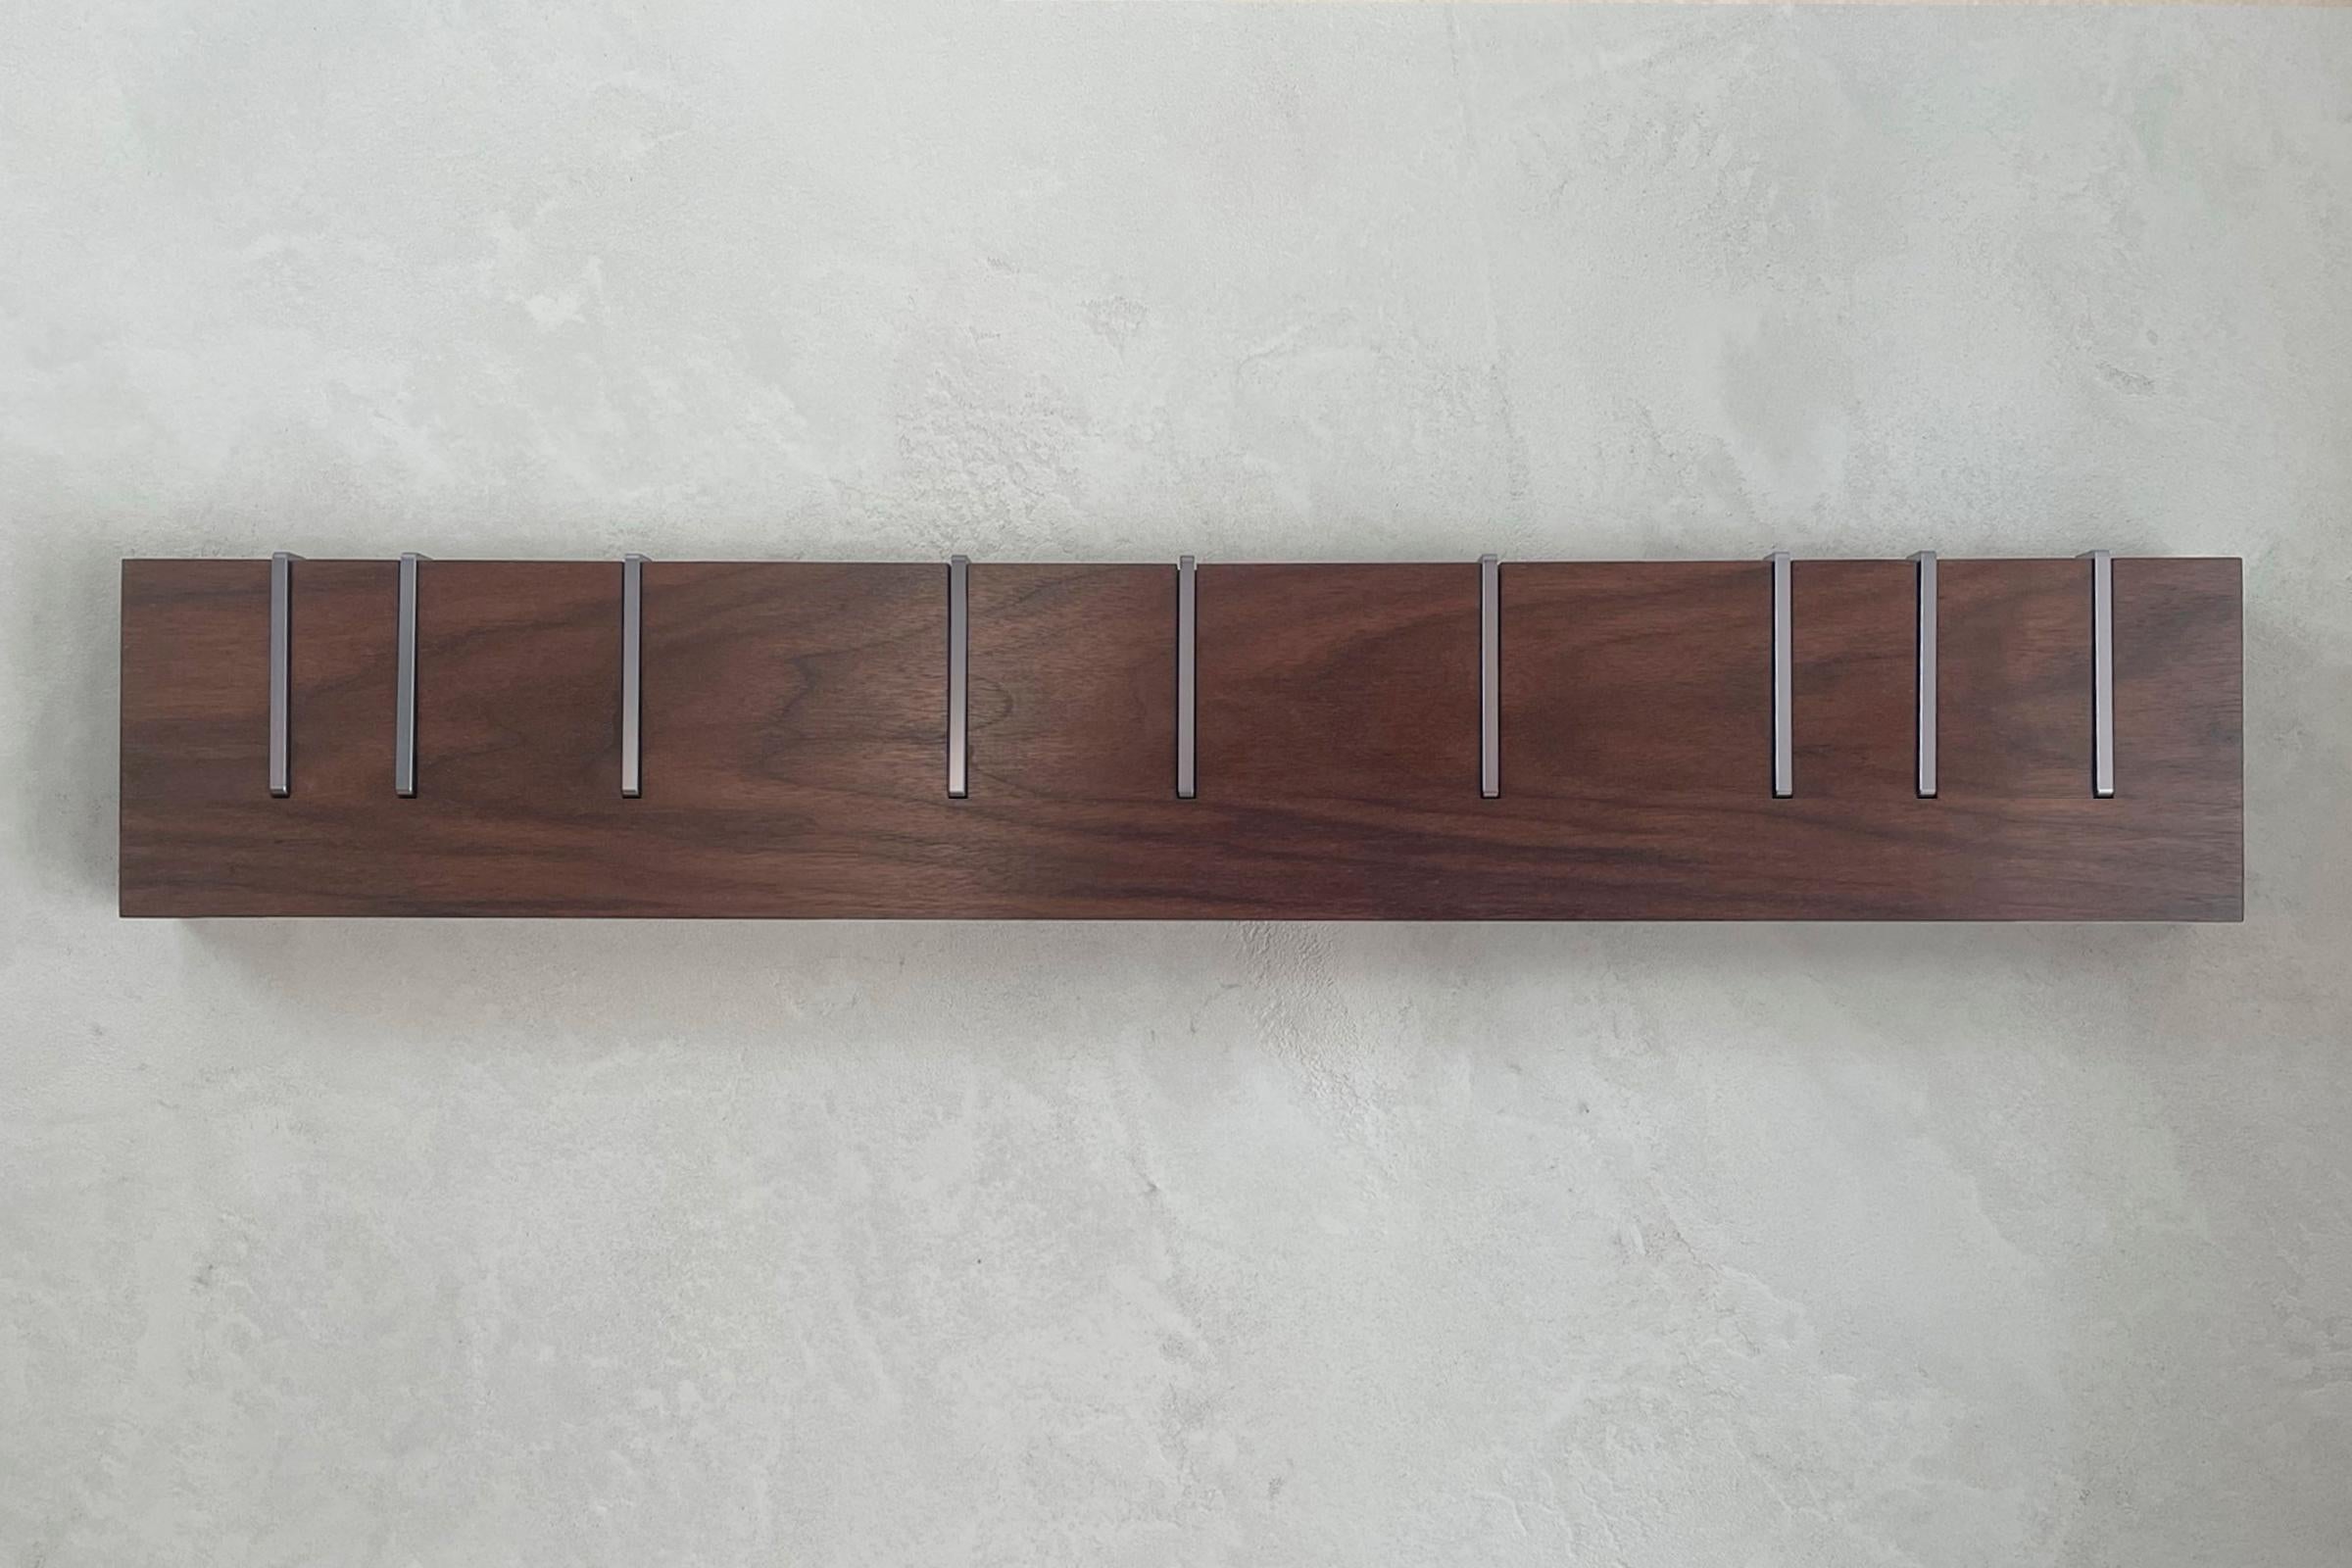 Symbol X is an ongoing exploration into rendering our iconic symbol coat rack in new materials and finishes. With limited, small batch productions each unit is one of a kind. The photos on this page are of the exact coat rack you will receive,